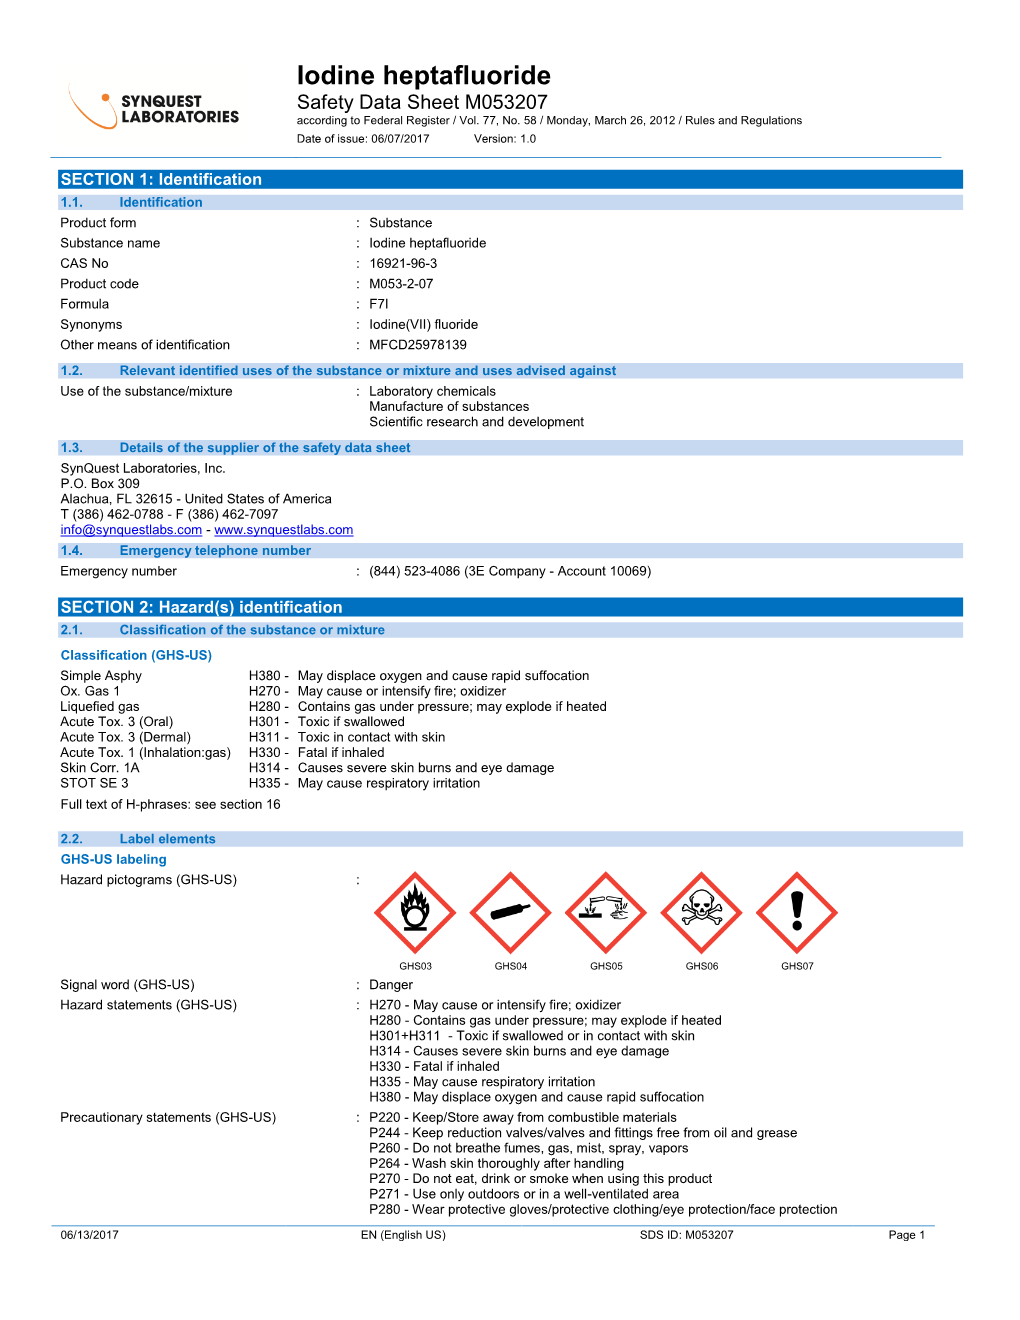 Iodine Heptafluoride Safety Data Sheet M053207 According to Federal Register / Vol